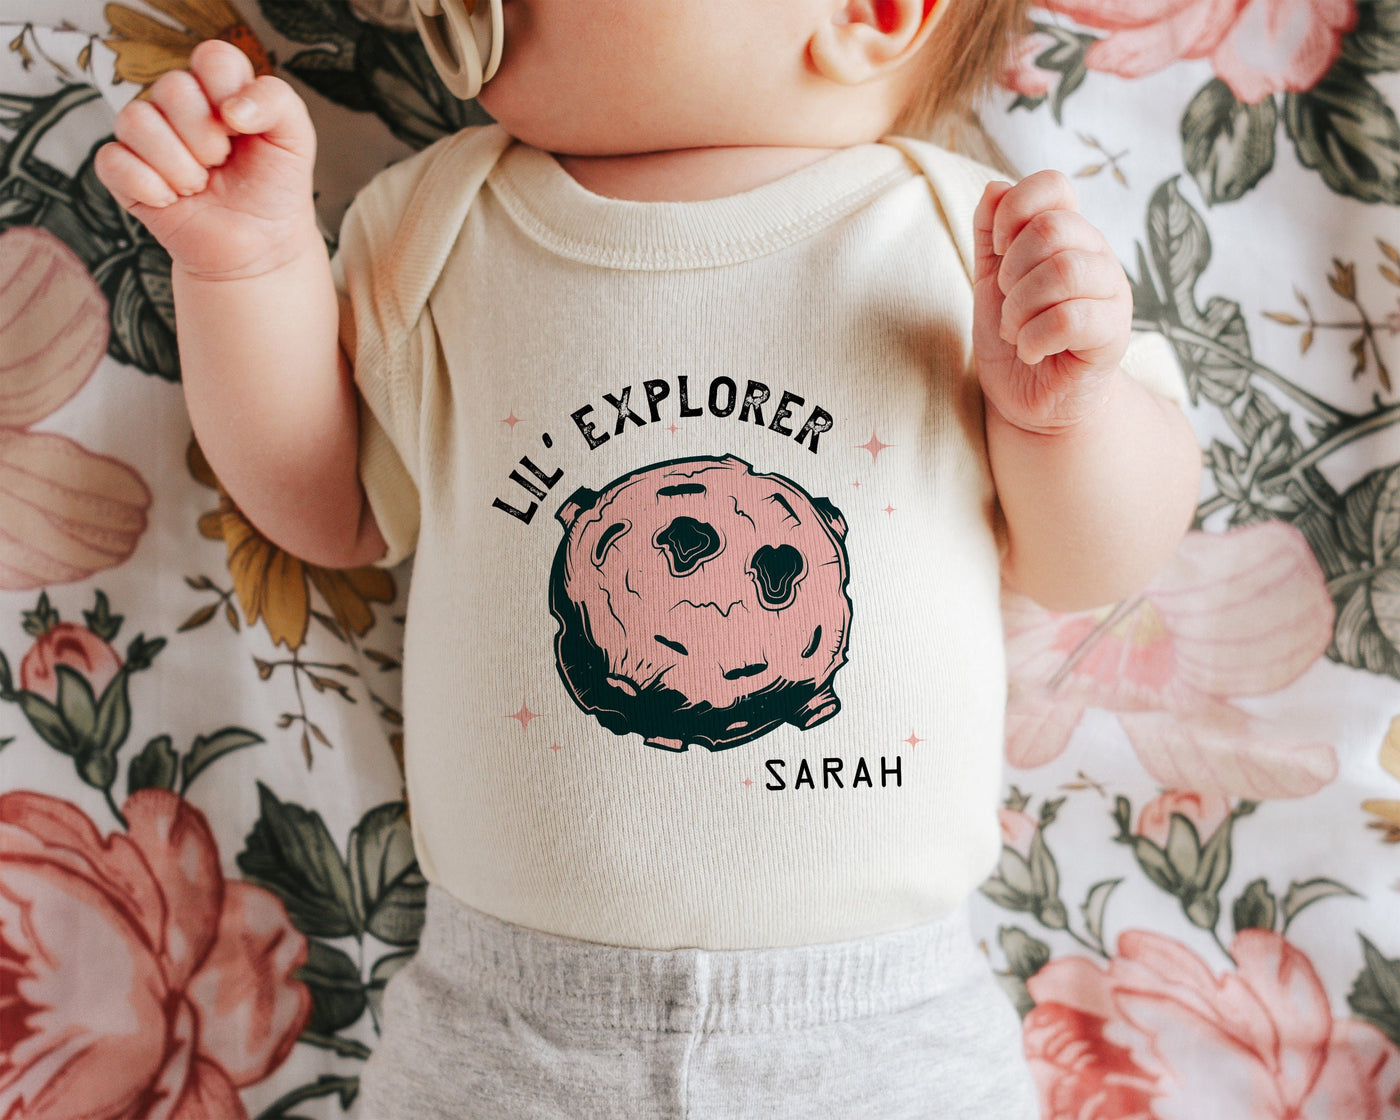 Explorer Kids Shirt, Infant One Piece, Cool Baby Bodysuits, Space Kids Clothing, Cute Baby Bodysuits, Baby One Piece, Cute Toddler Bodysuits